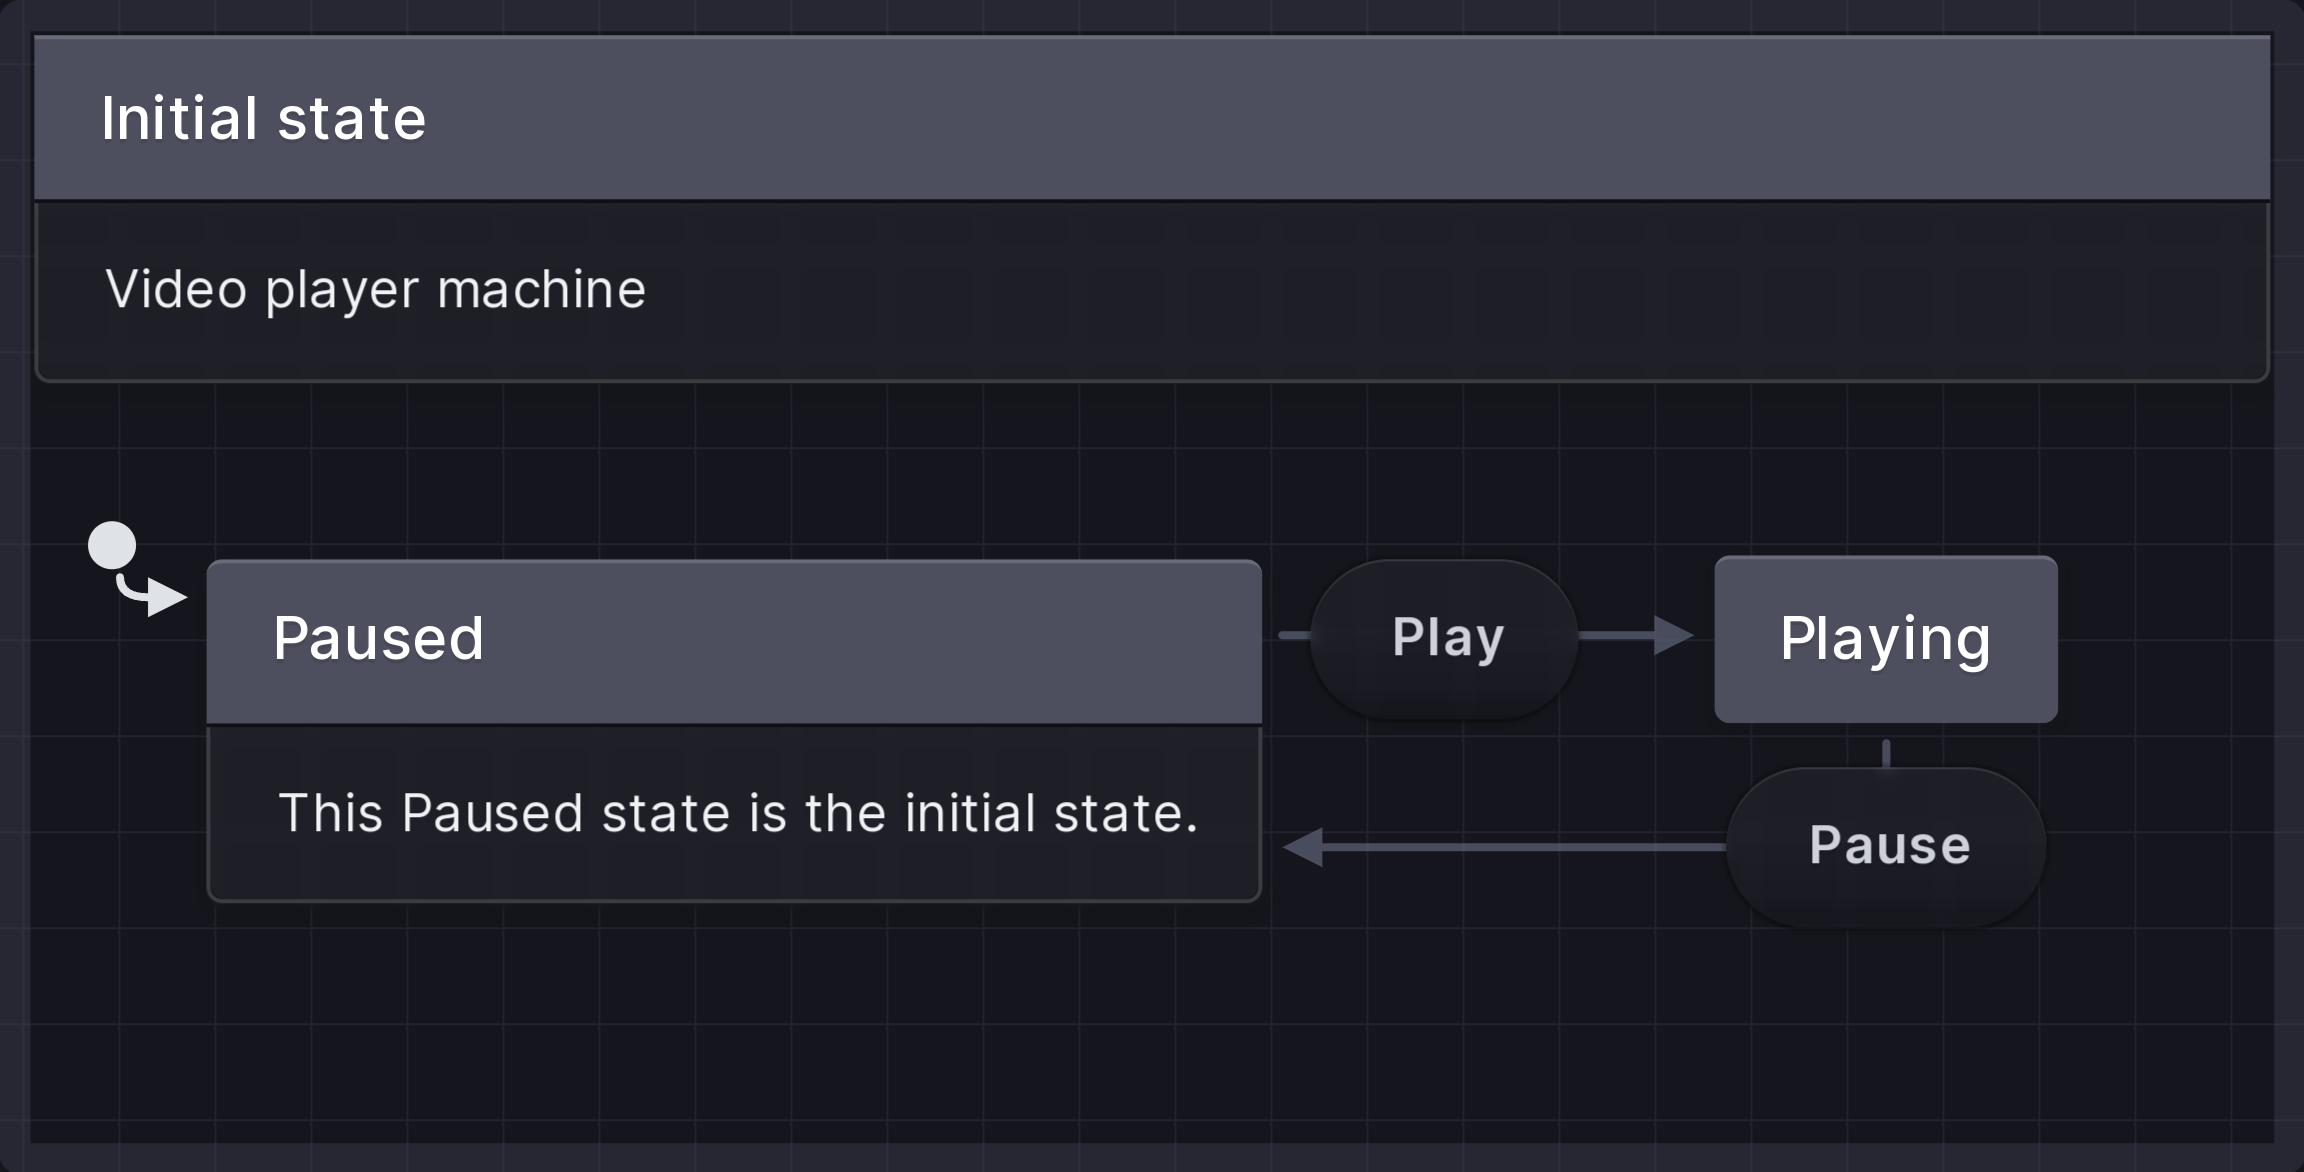 State machine with an initial state of Paused, transitioning through a Play event to the Playing state. From the Playing state back to the Paused state is a Pause event.